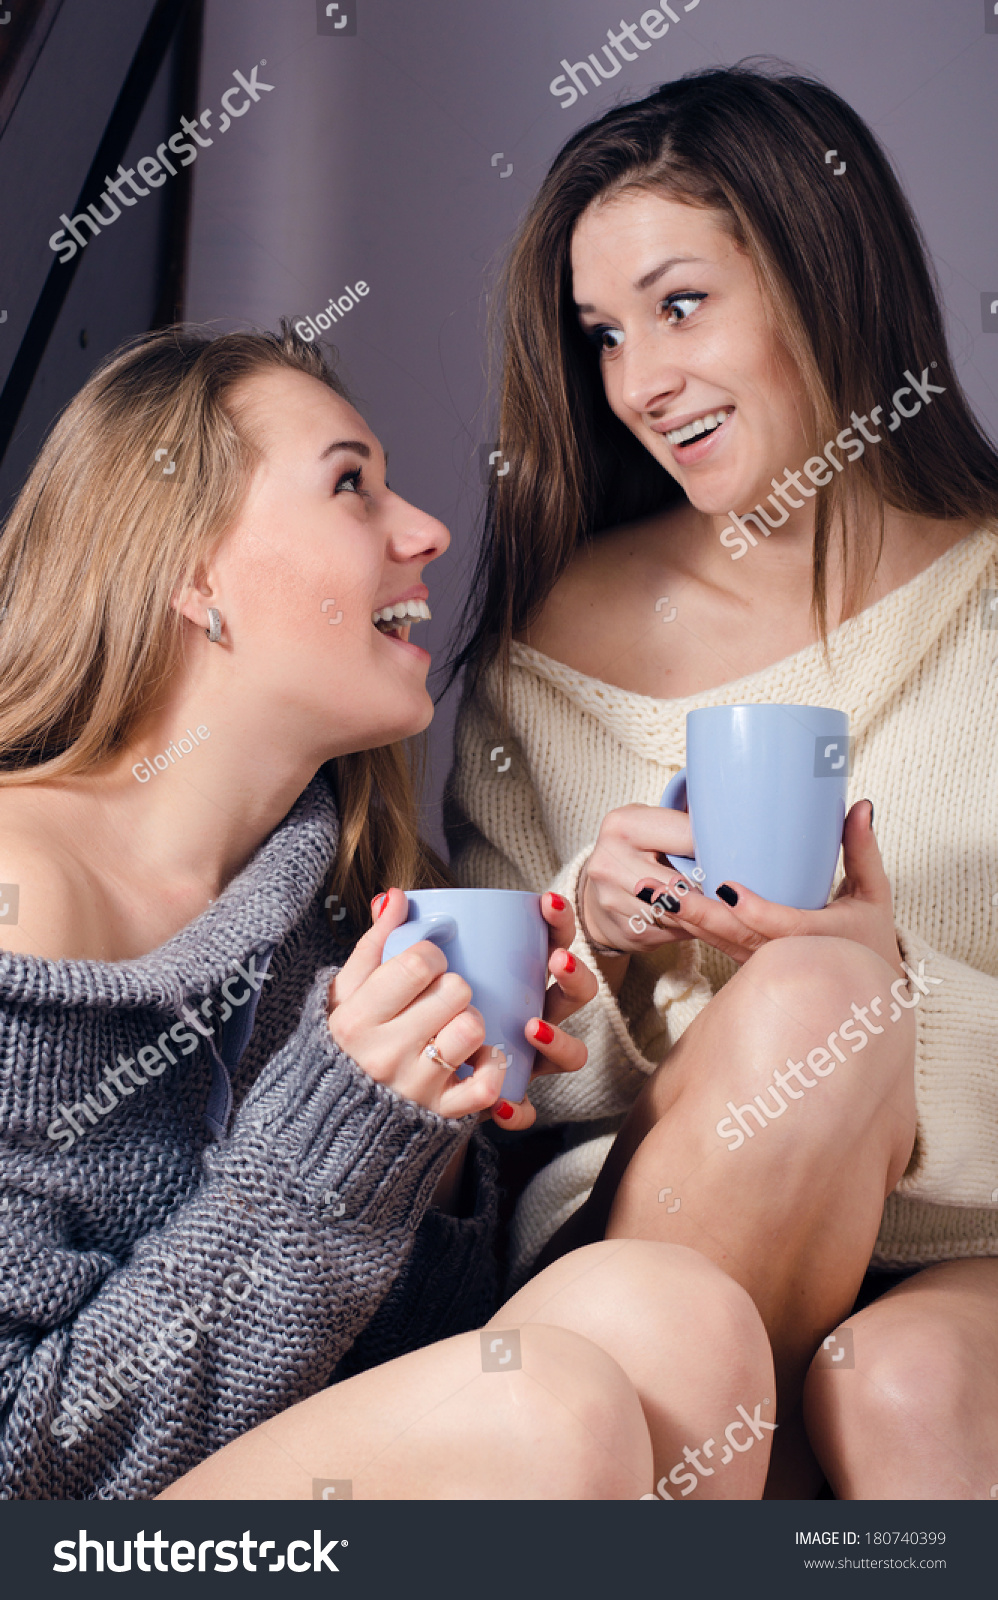 portrait of two young adorable attractive positive women in sweaters smiling and drinking beverages on gray background #180740399